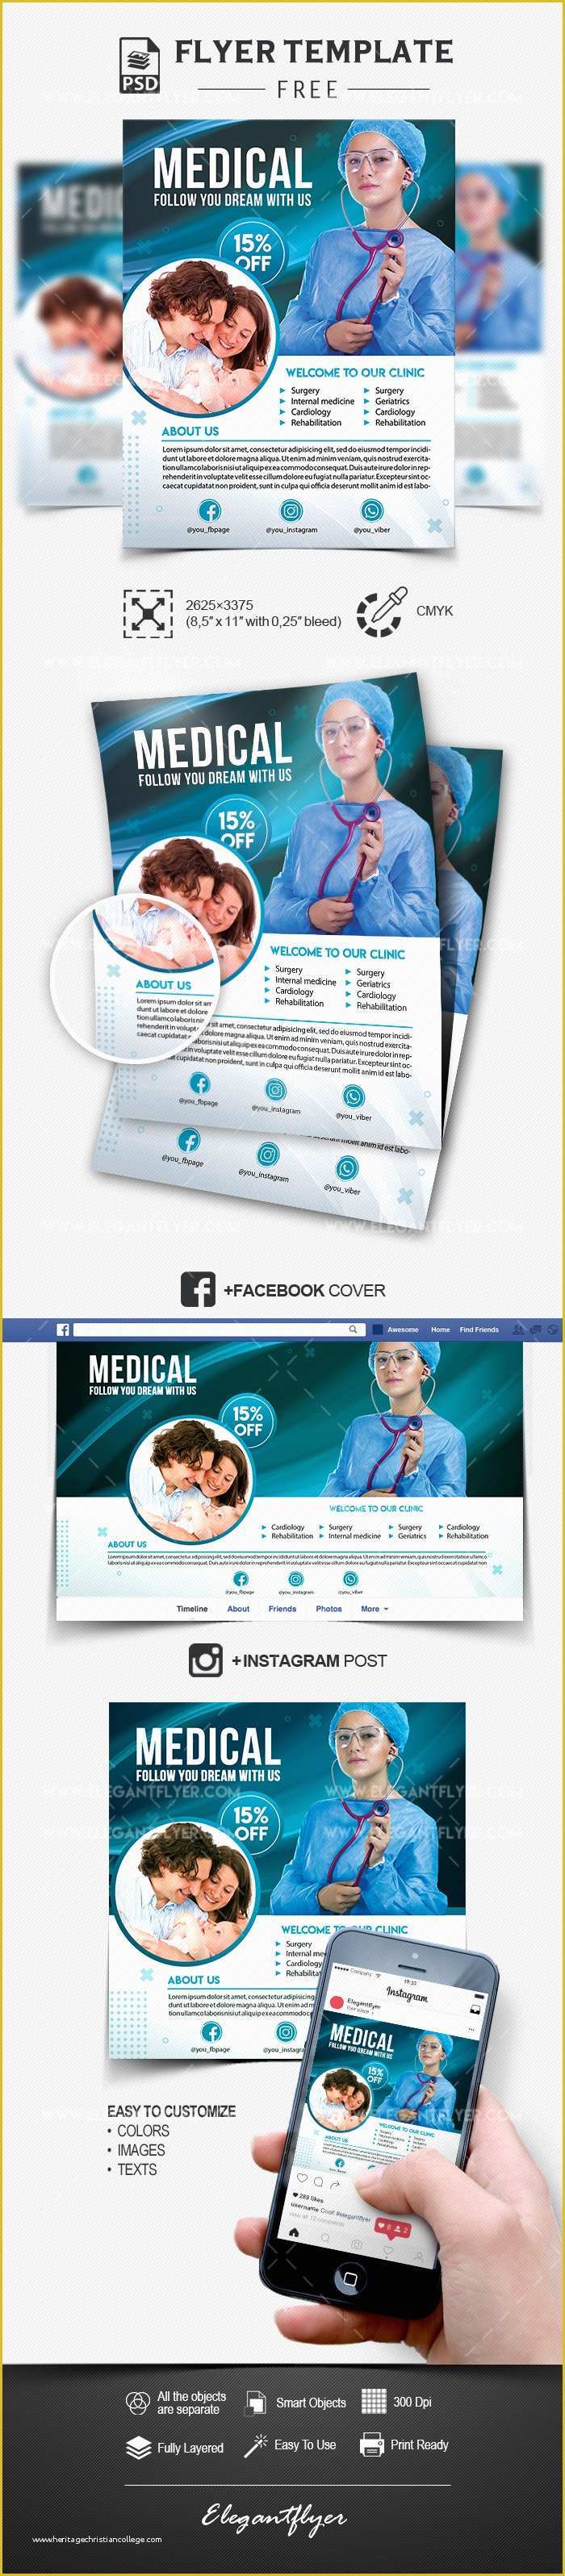 Free Instagram Flyer Template Of Medical Help – Free Psd Flyer Template Cover